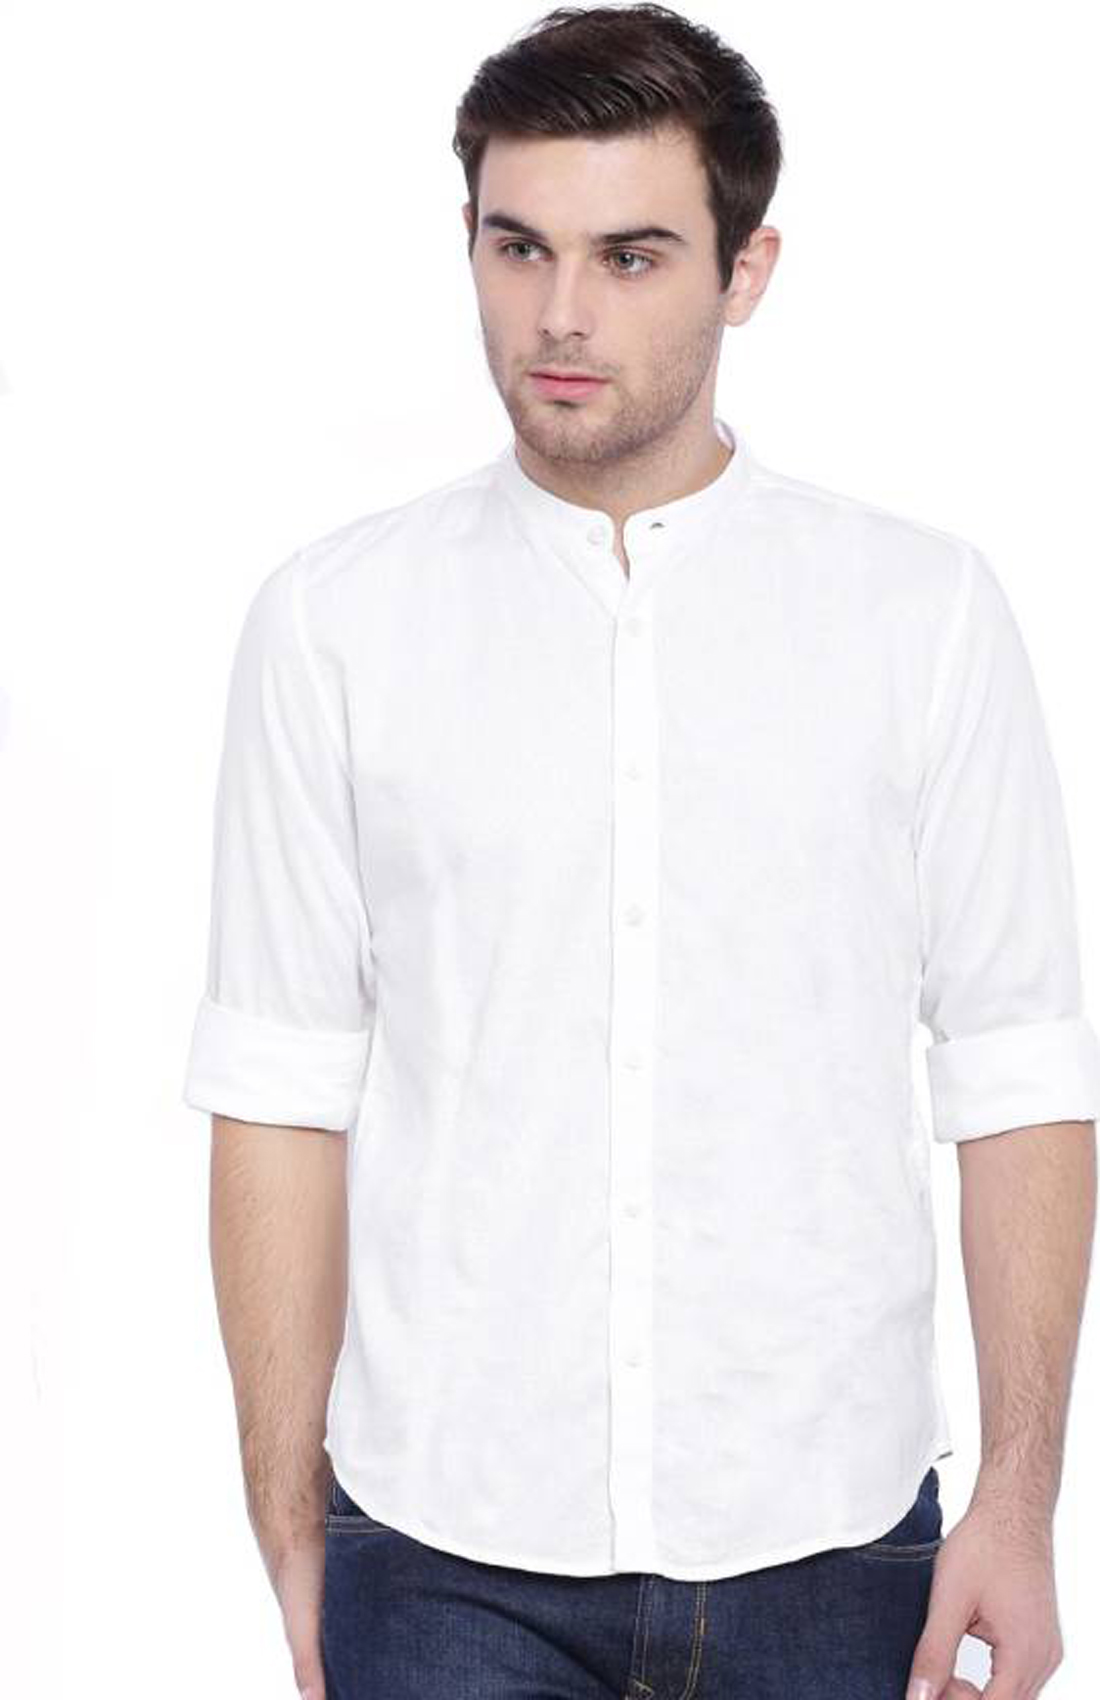 Buy Men's Solid Casual White Shirt Online @ ₹549 from ShopClues